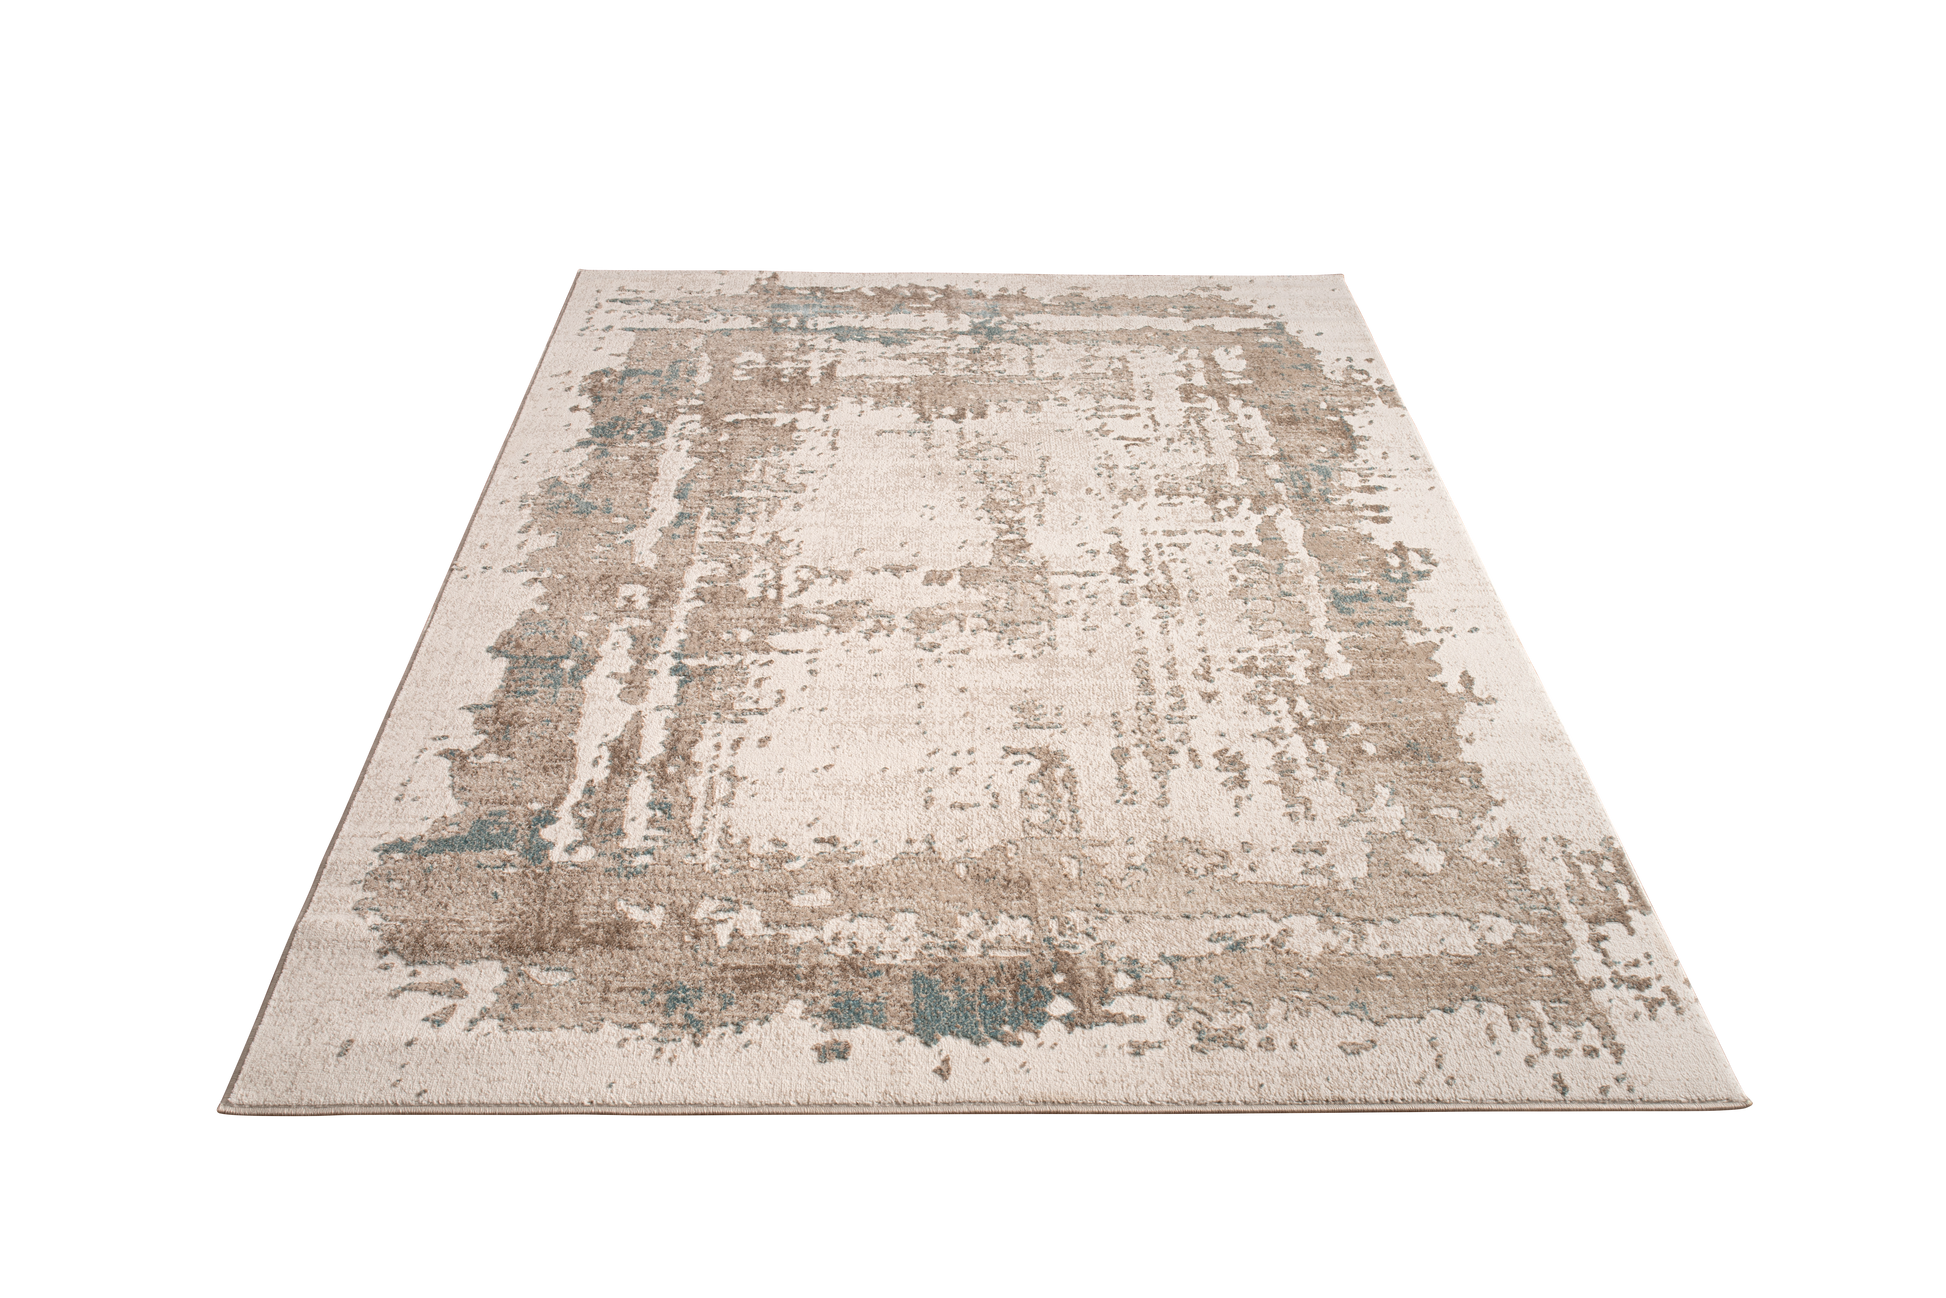 beige turquoise abstract living room area rug 4x6, 4x5 ft Small Carpet, Home Office, Living Room, Bedroom